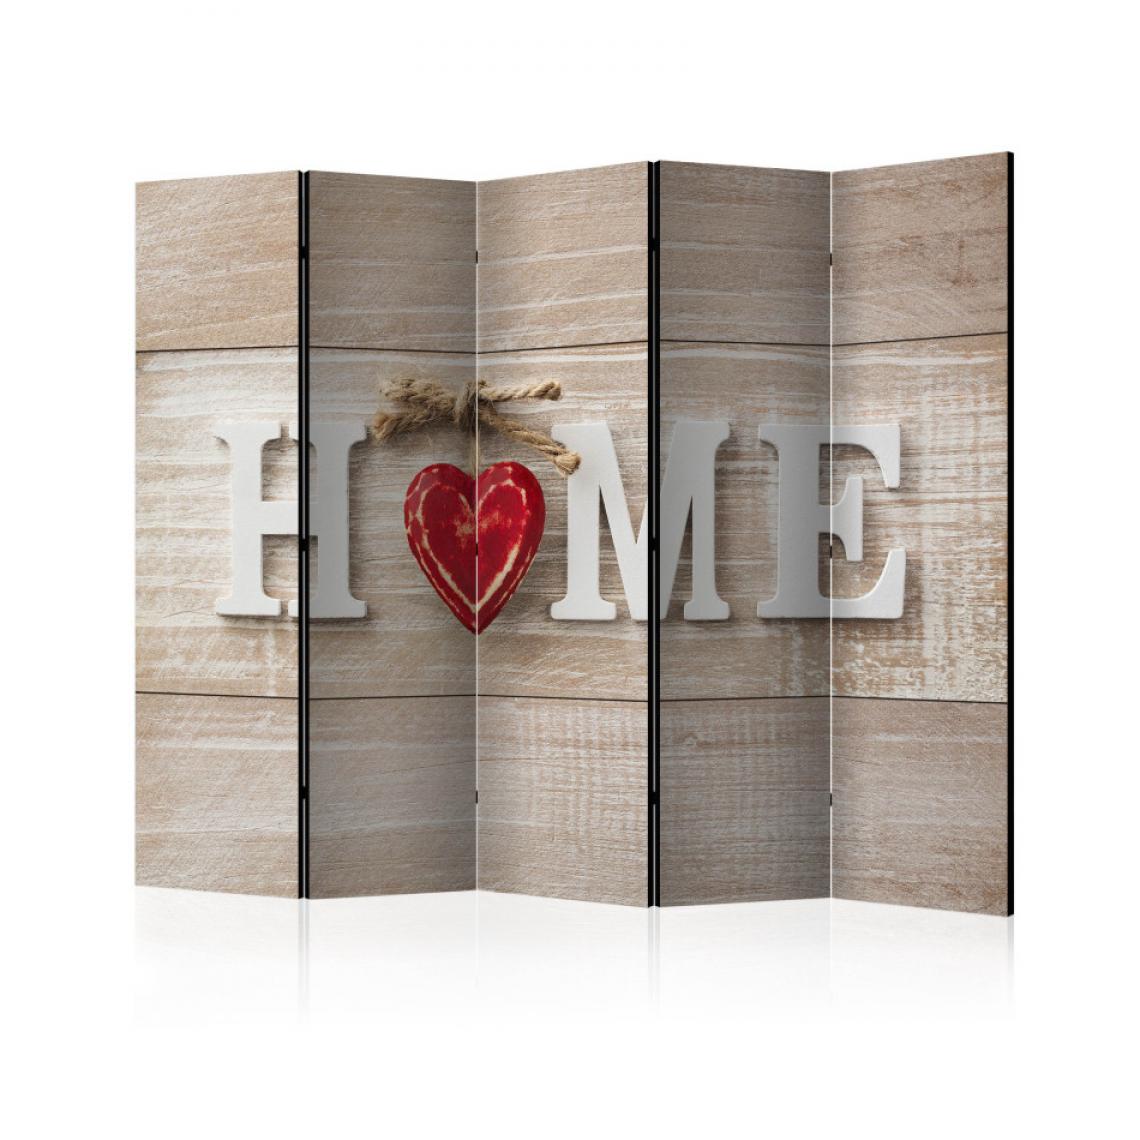 Artgeist - Paravent 5 volets - Room divider - Home and red heart 225x172 - Paravents